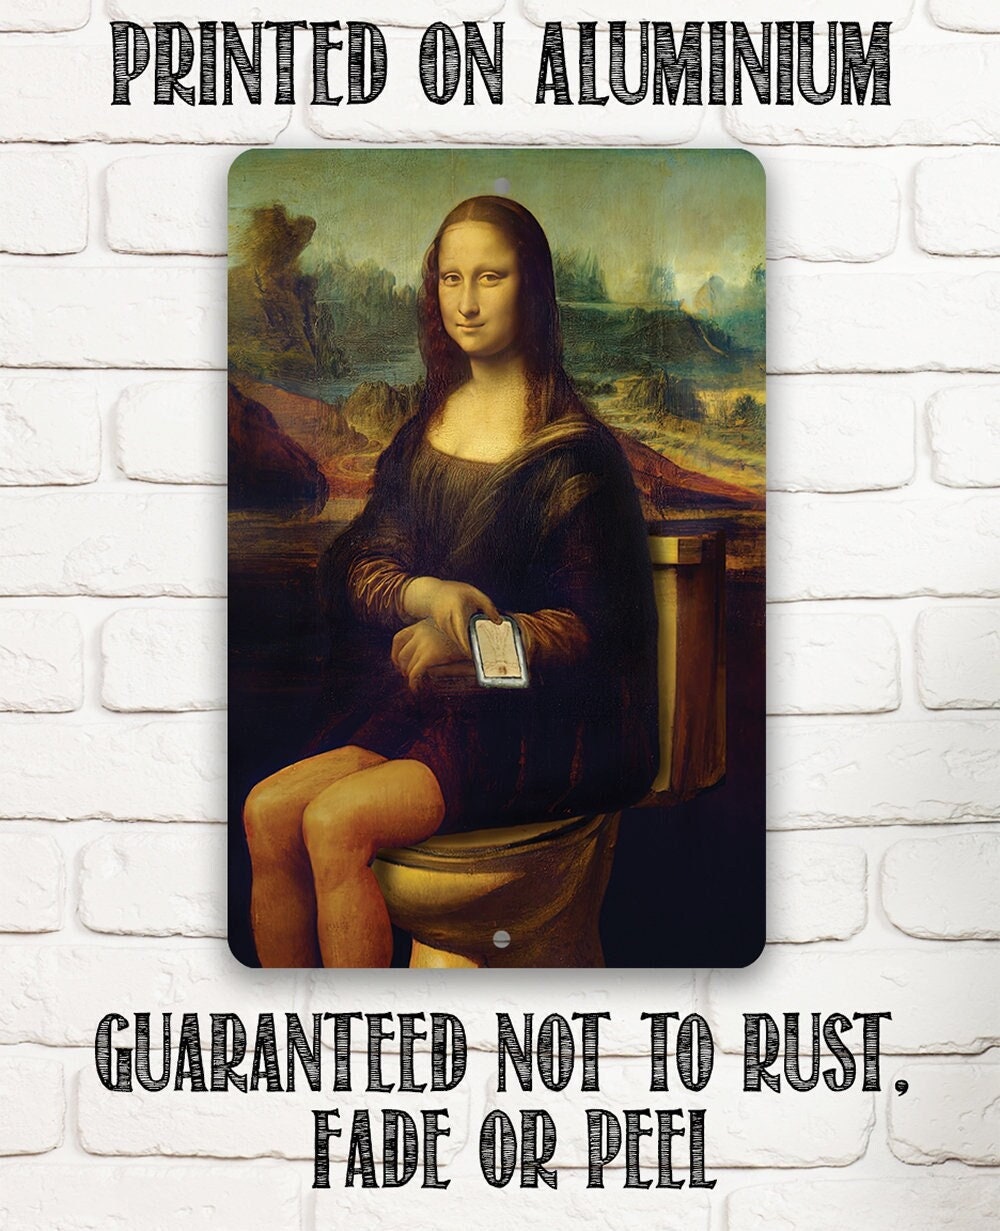 Mona Lisa on the Toilette Painting - Metal Sign Metal Sign Lone Star Art 